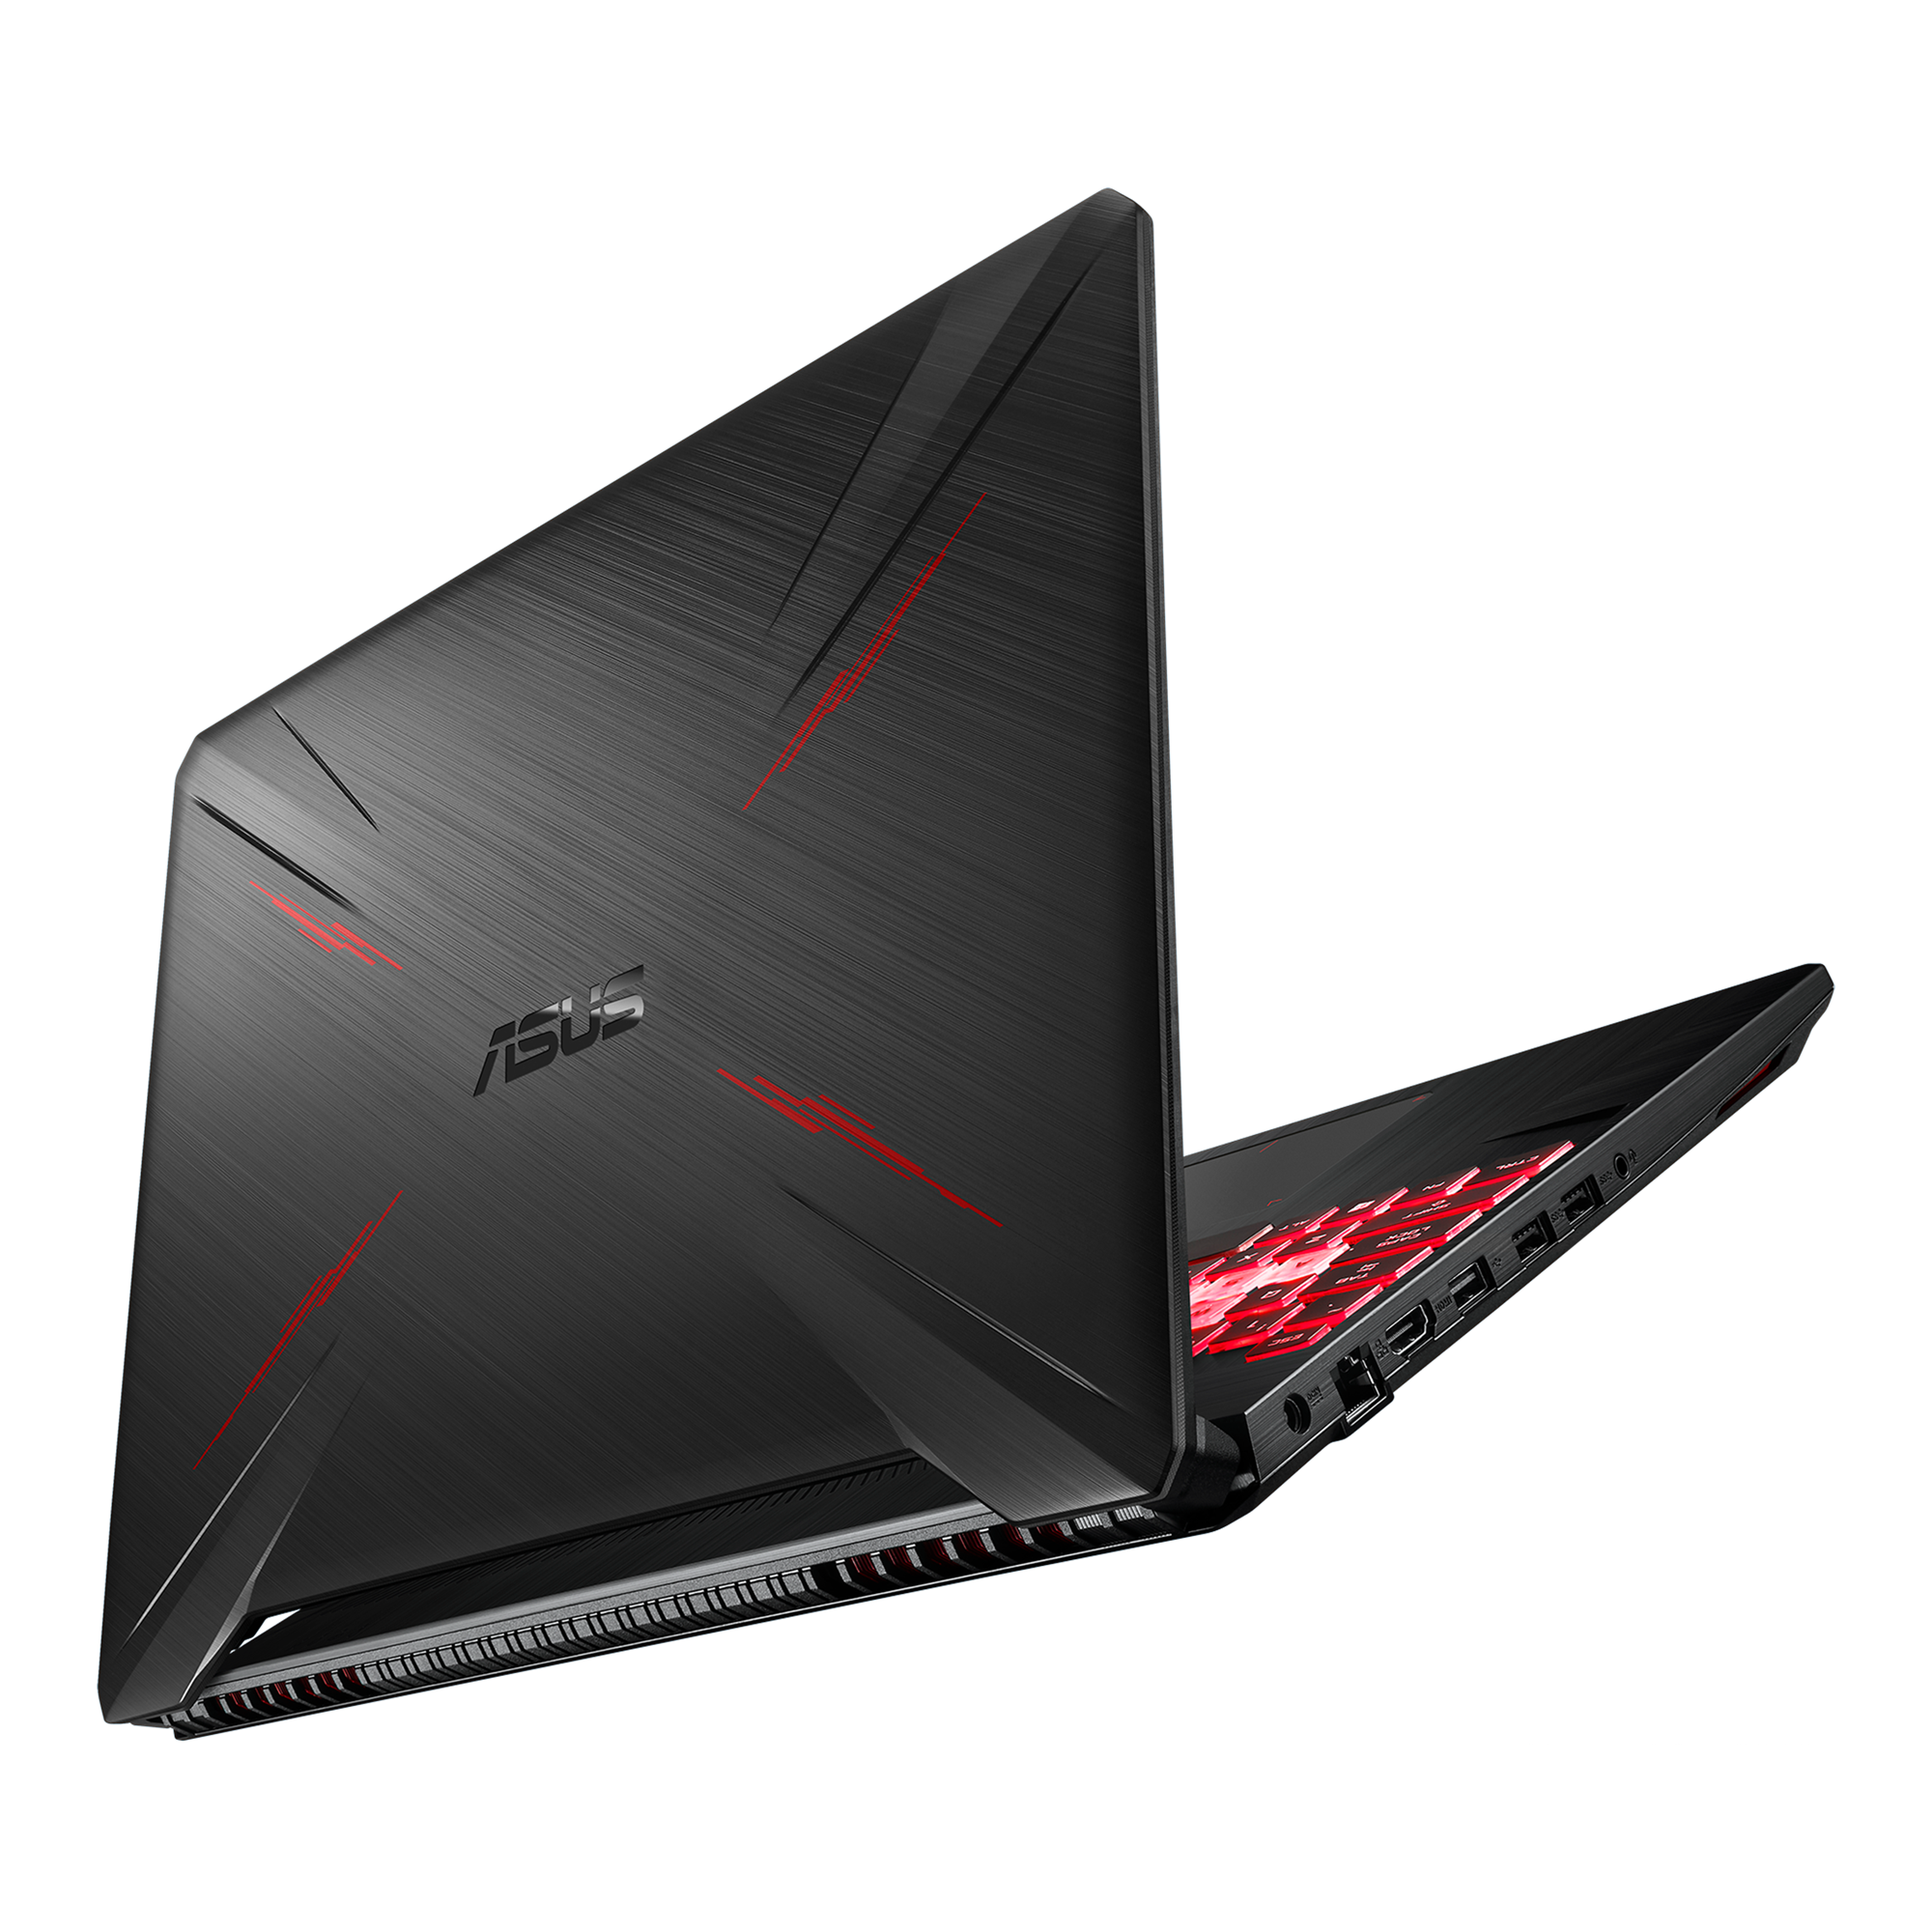 Graphics glitching on your ASUS TUF Gaming F15? Here's how to fix it